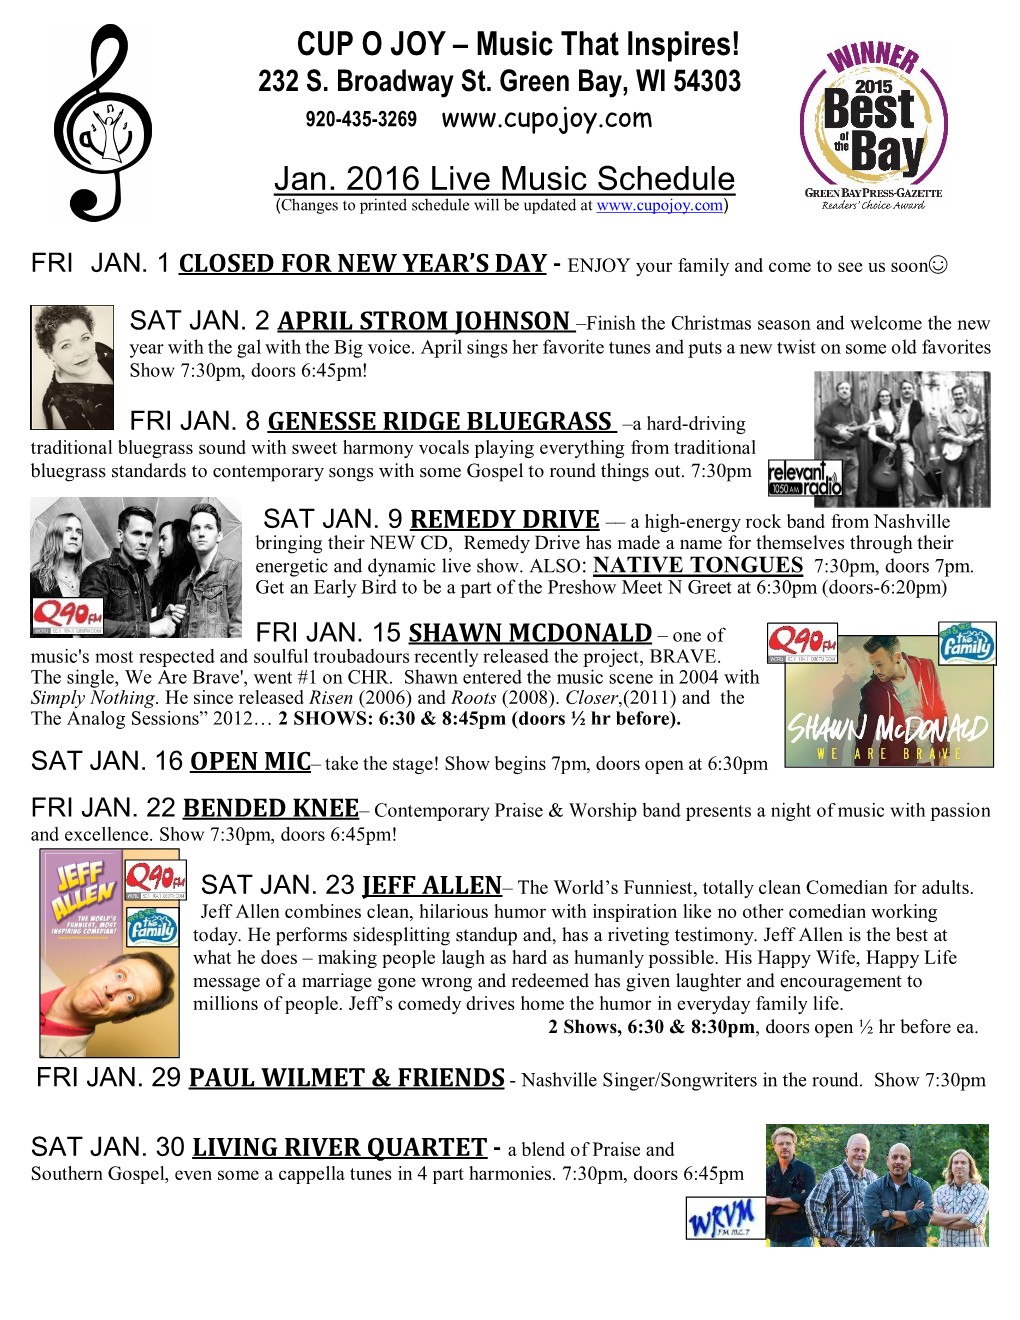 Music That Inspires! Jan. 2016 Live Music Schedule